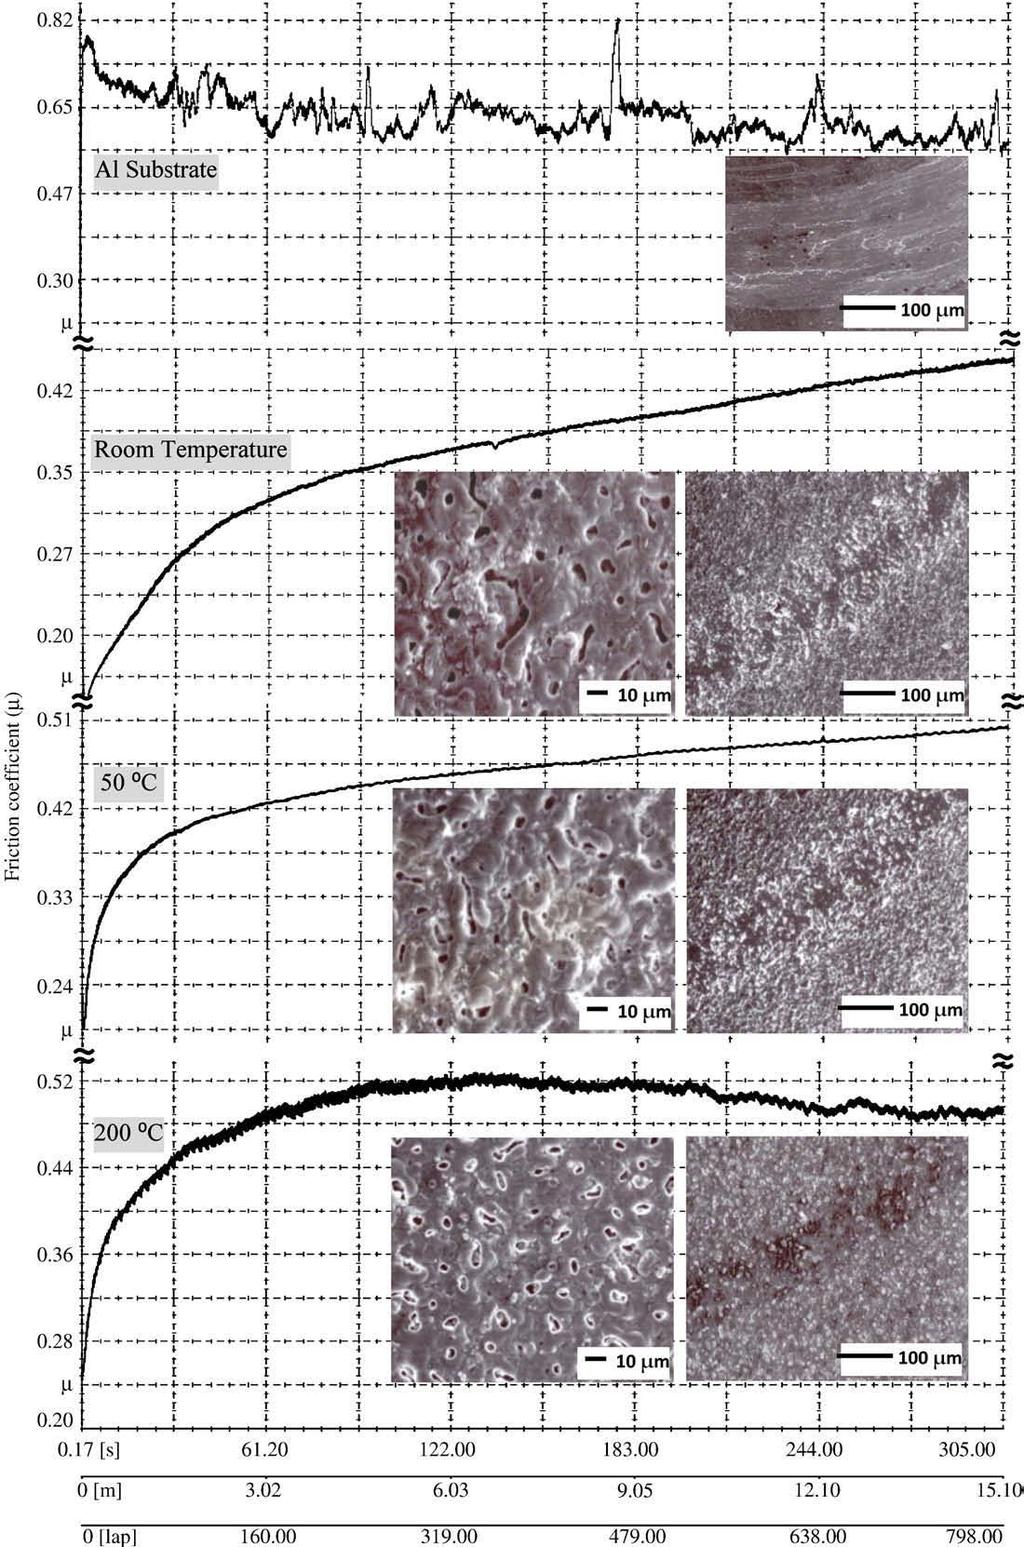 E. Arslan et al. / Surface & Coatings Technology 204 (2009) 829 833 831 The layer/substrate interface was clear, and exhibited a good metallurgical adhesion between layer and substrate.